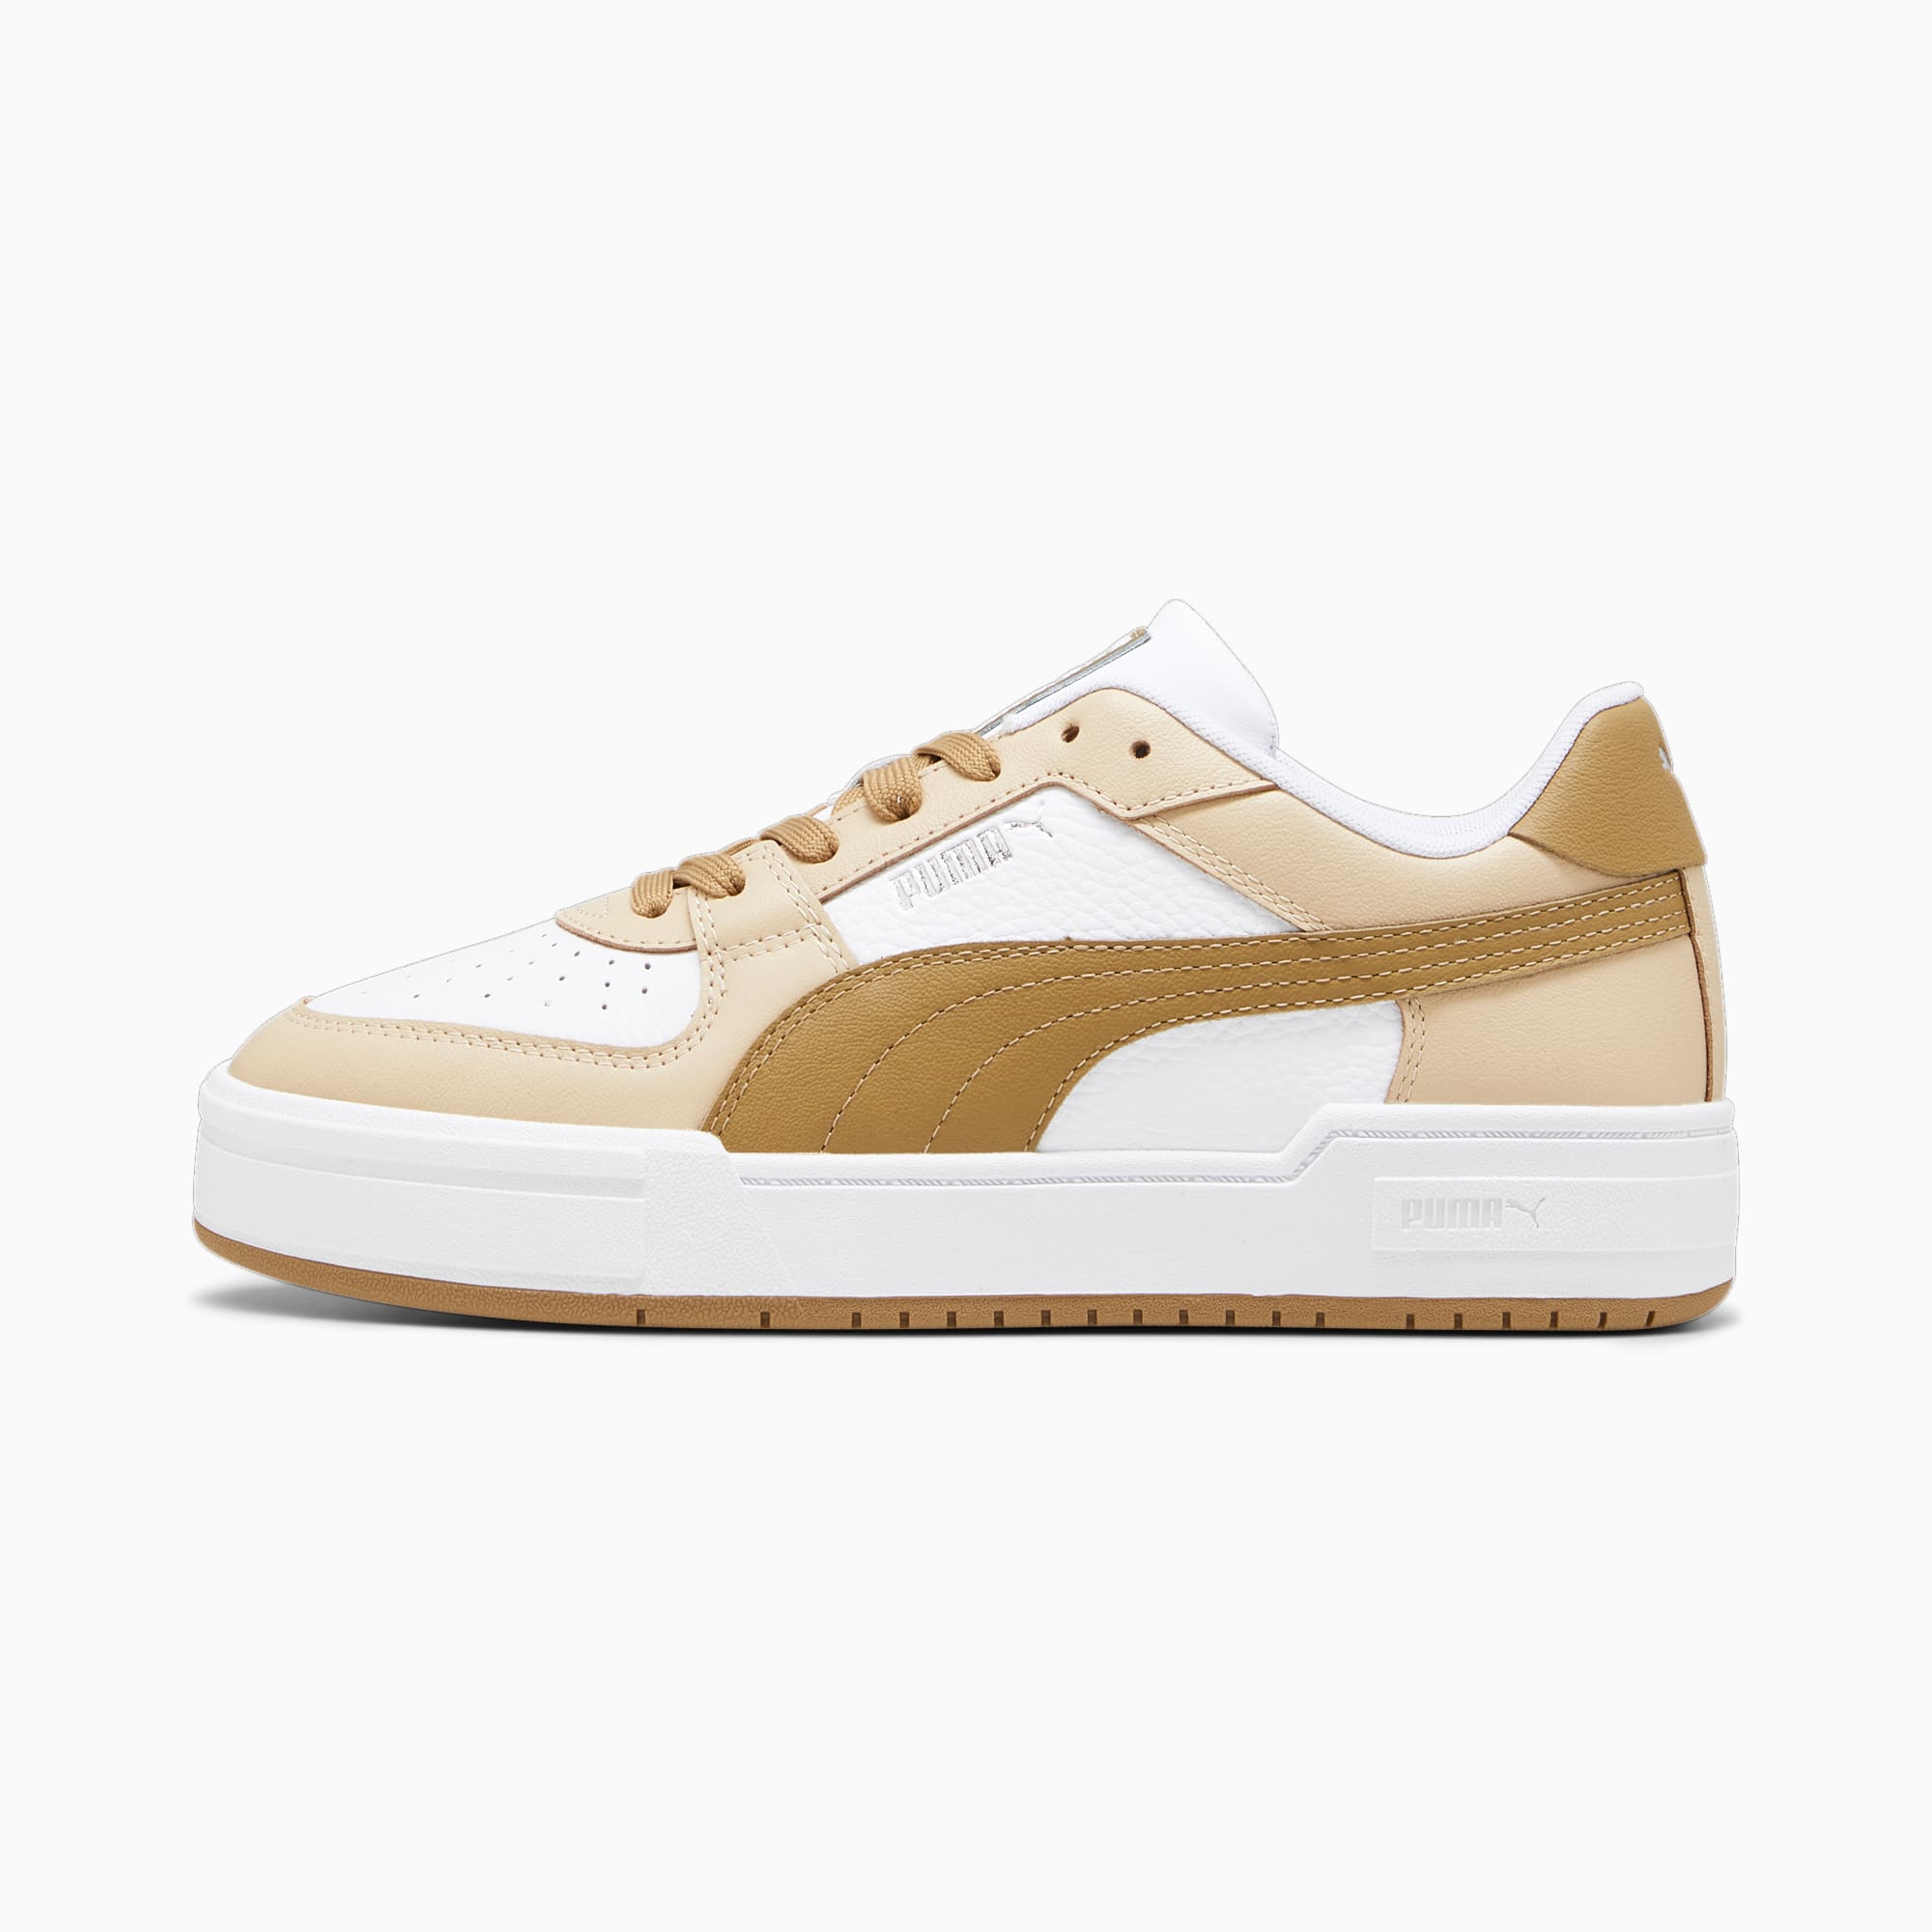 Women's PUMA Ca Pro Classic Trainers, White/Granola/Toasted, Size 38, Shoes